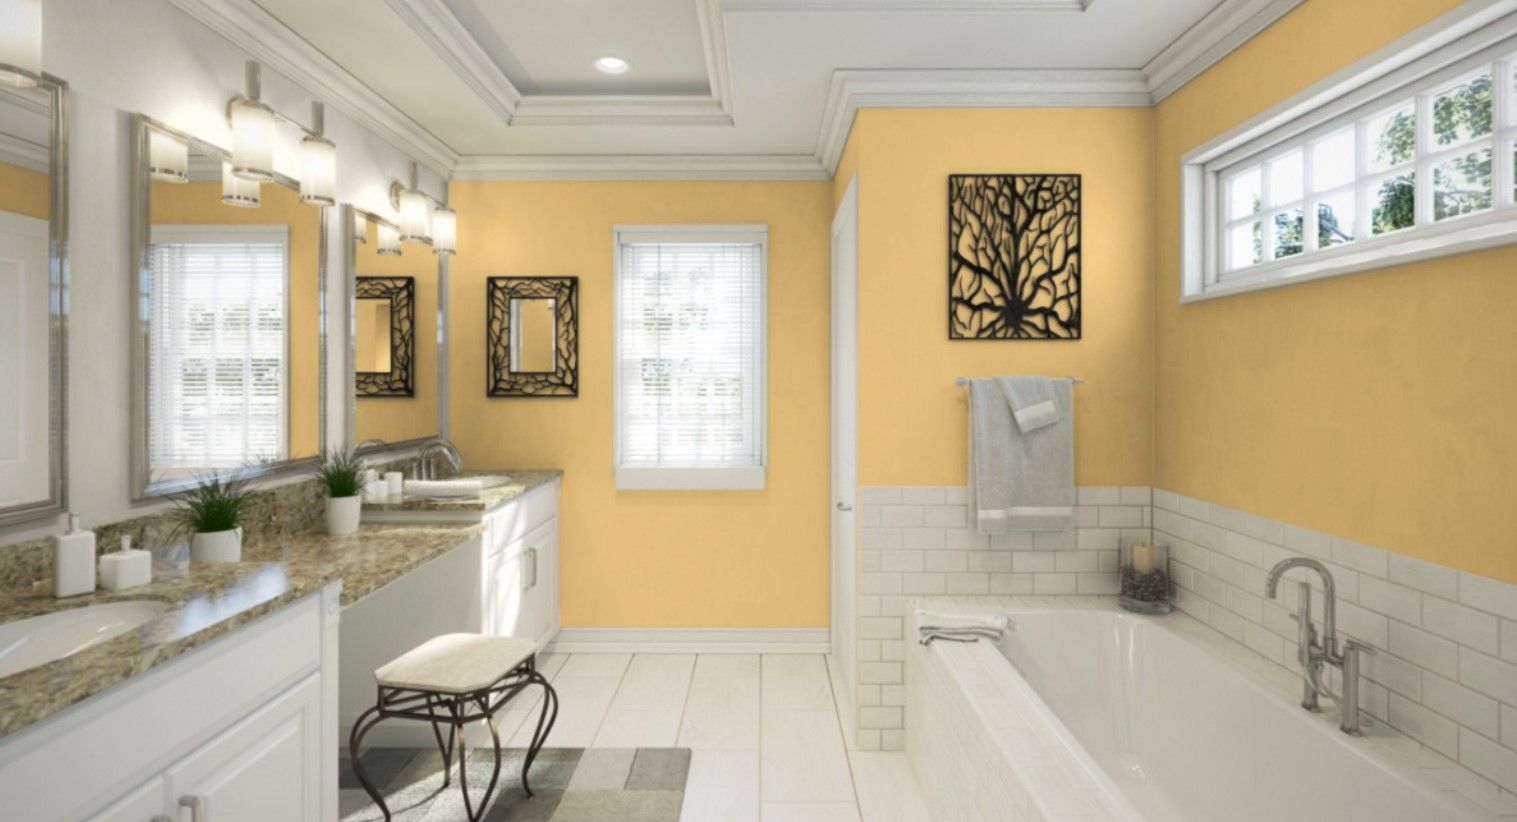 Sherwin Williams Jonquil infuses the bathroom with some extra color and cheerfulness. (2)